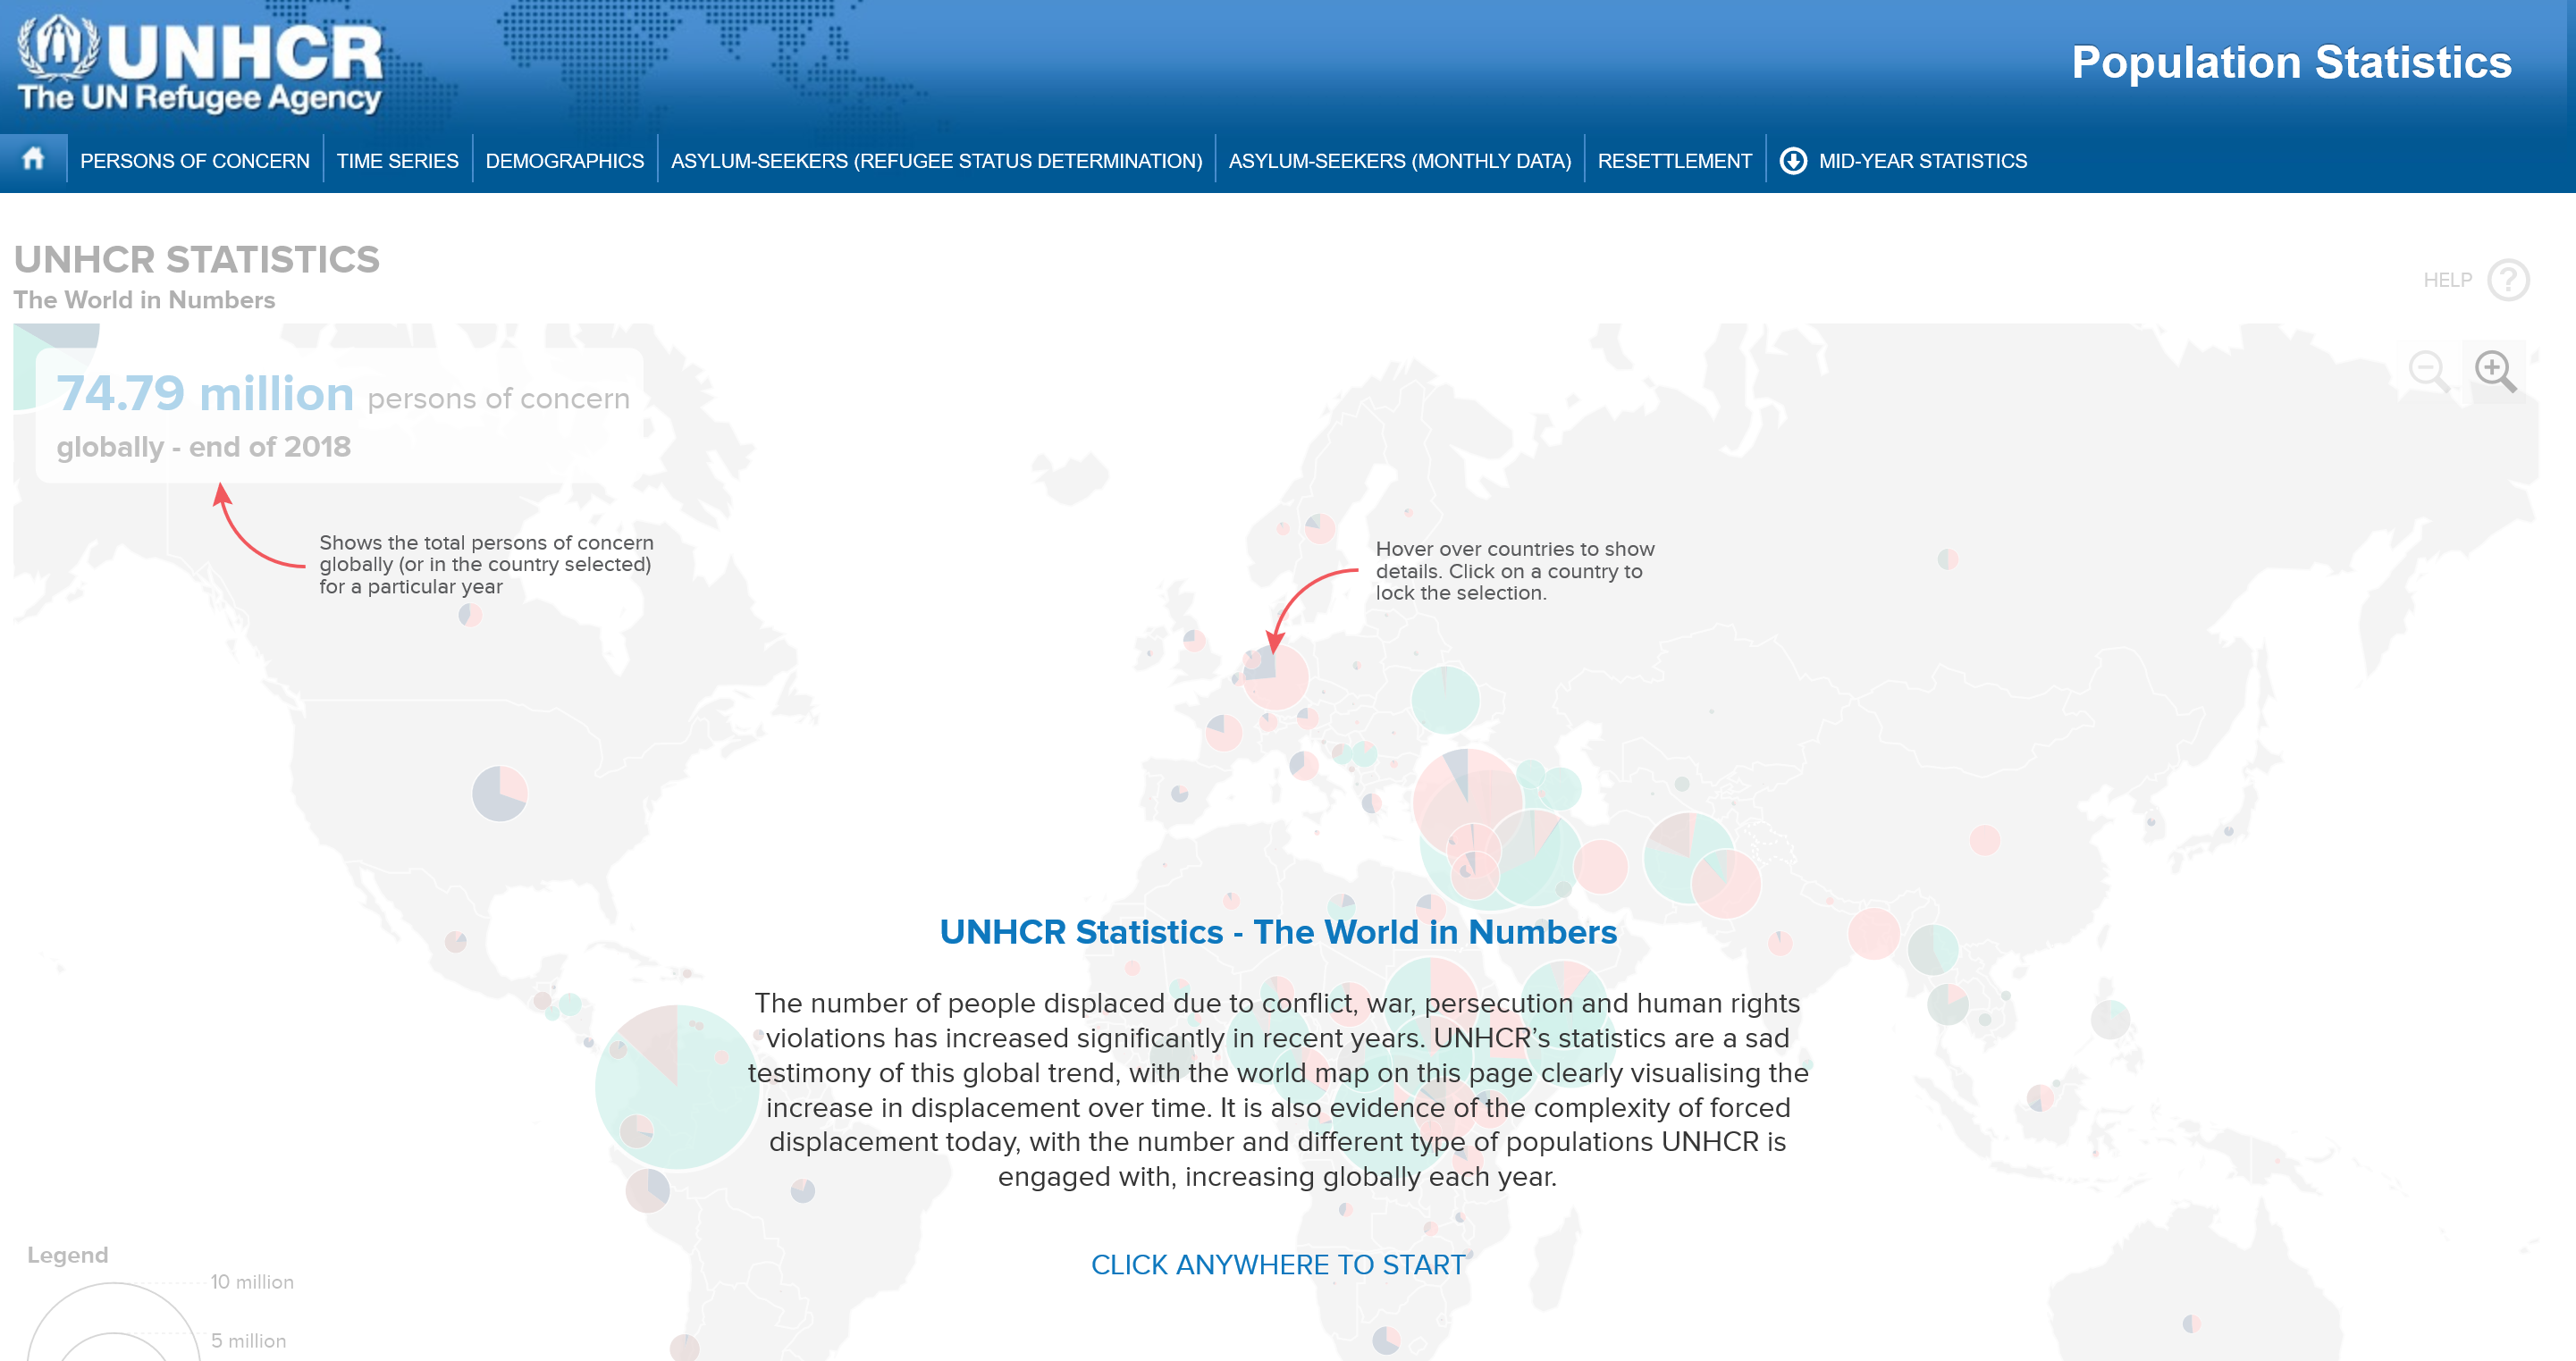 Screenshot of the UNHCR Population Statistics main page. There is a world map with a number indicating persons concerned in the top-left corner and a link to the UNHRC Statistics in the center. Above the map, there are buttons which allows you to explore the dataset, in which the second from the left is TIME SERIES.